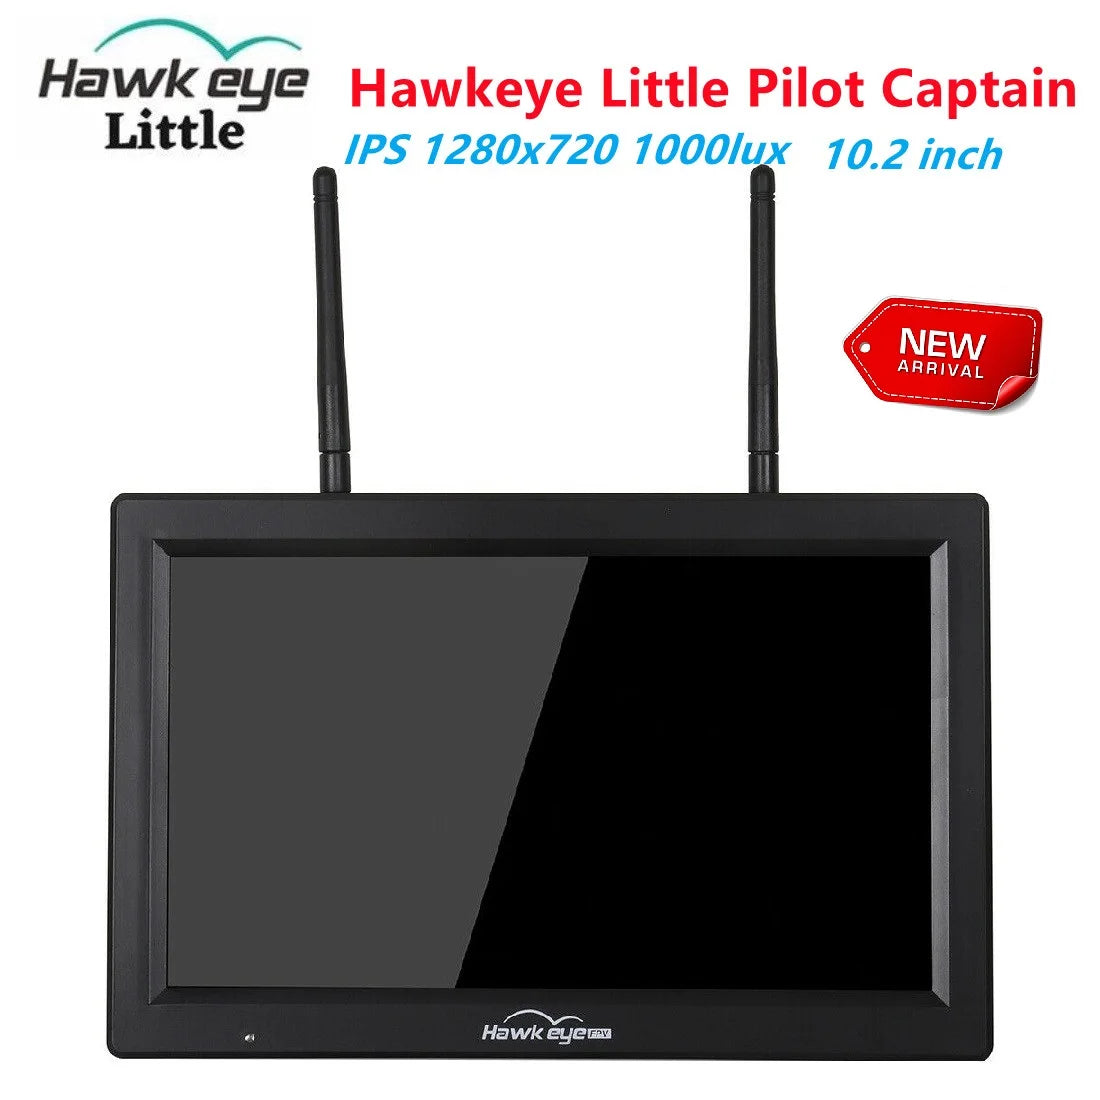 Hawkeye Little Pilot Captain 10.2 inch IPS 1280x720 1000lux 5.8G 48CH Dual Receiver DVR FPV Monitor 3S-6S for FPV Racing Drone